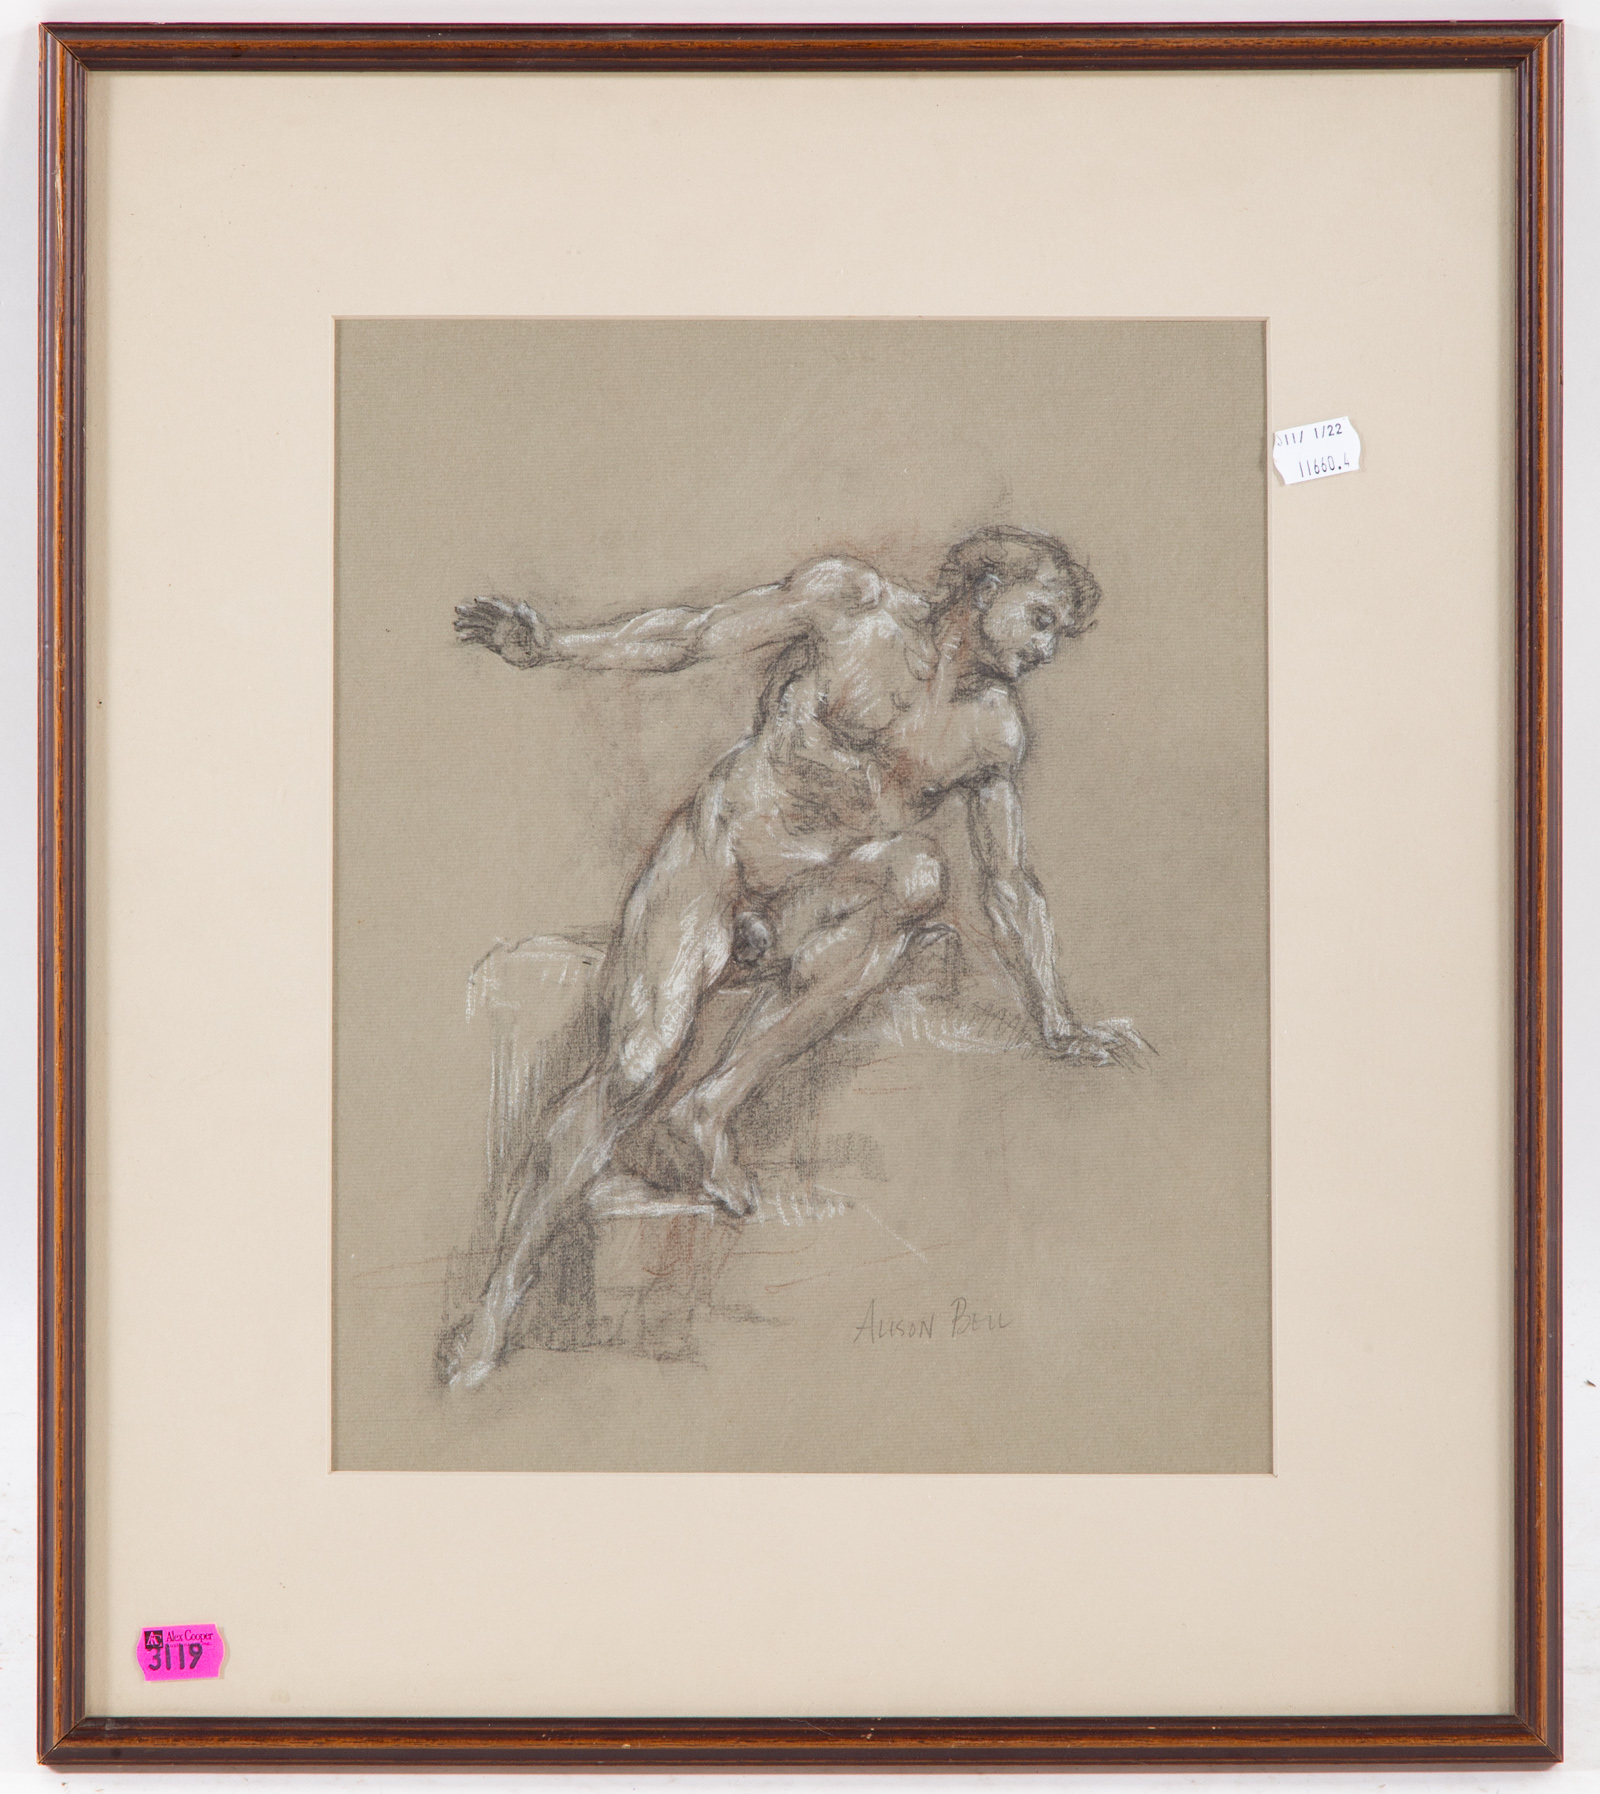 ALISON BELL. STUDY OF A MALE NUDE,